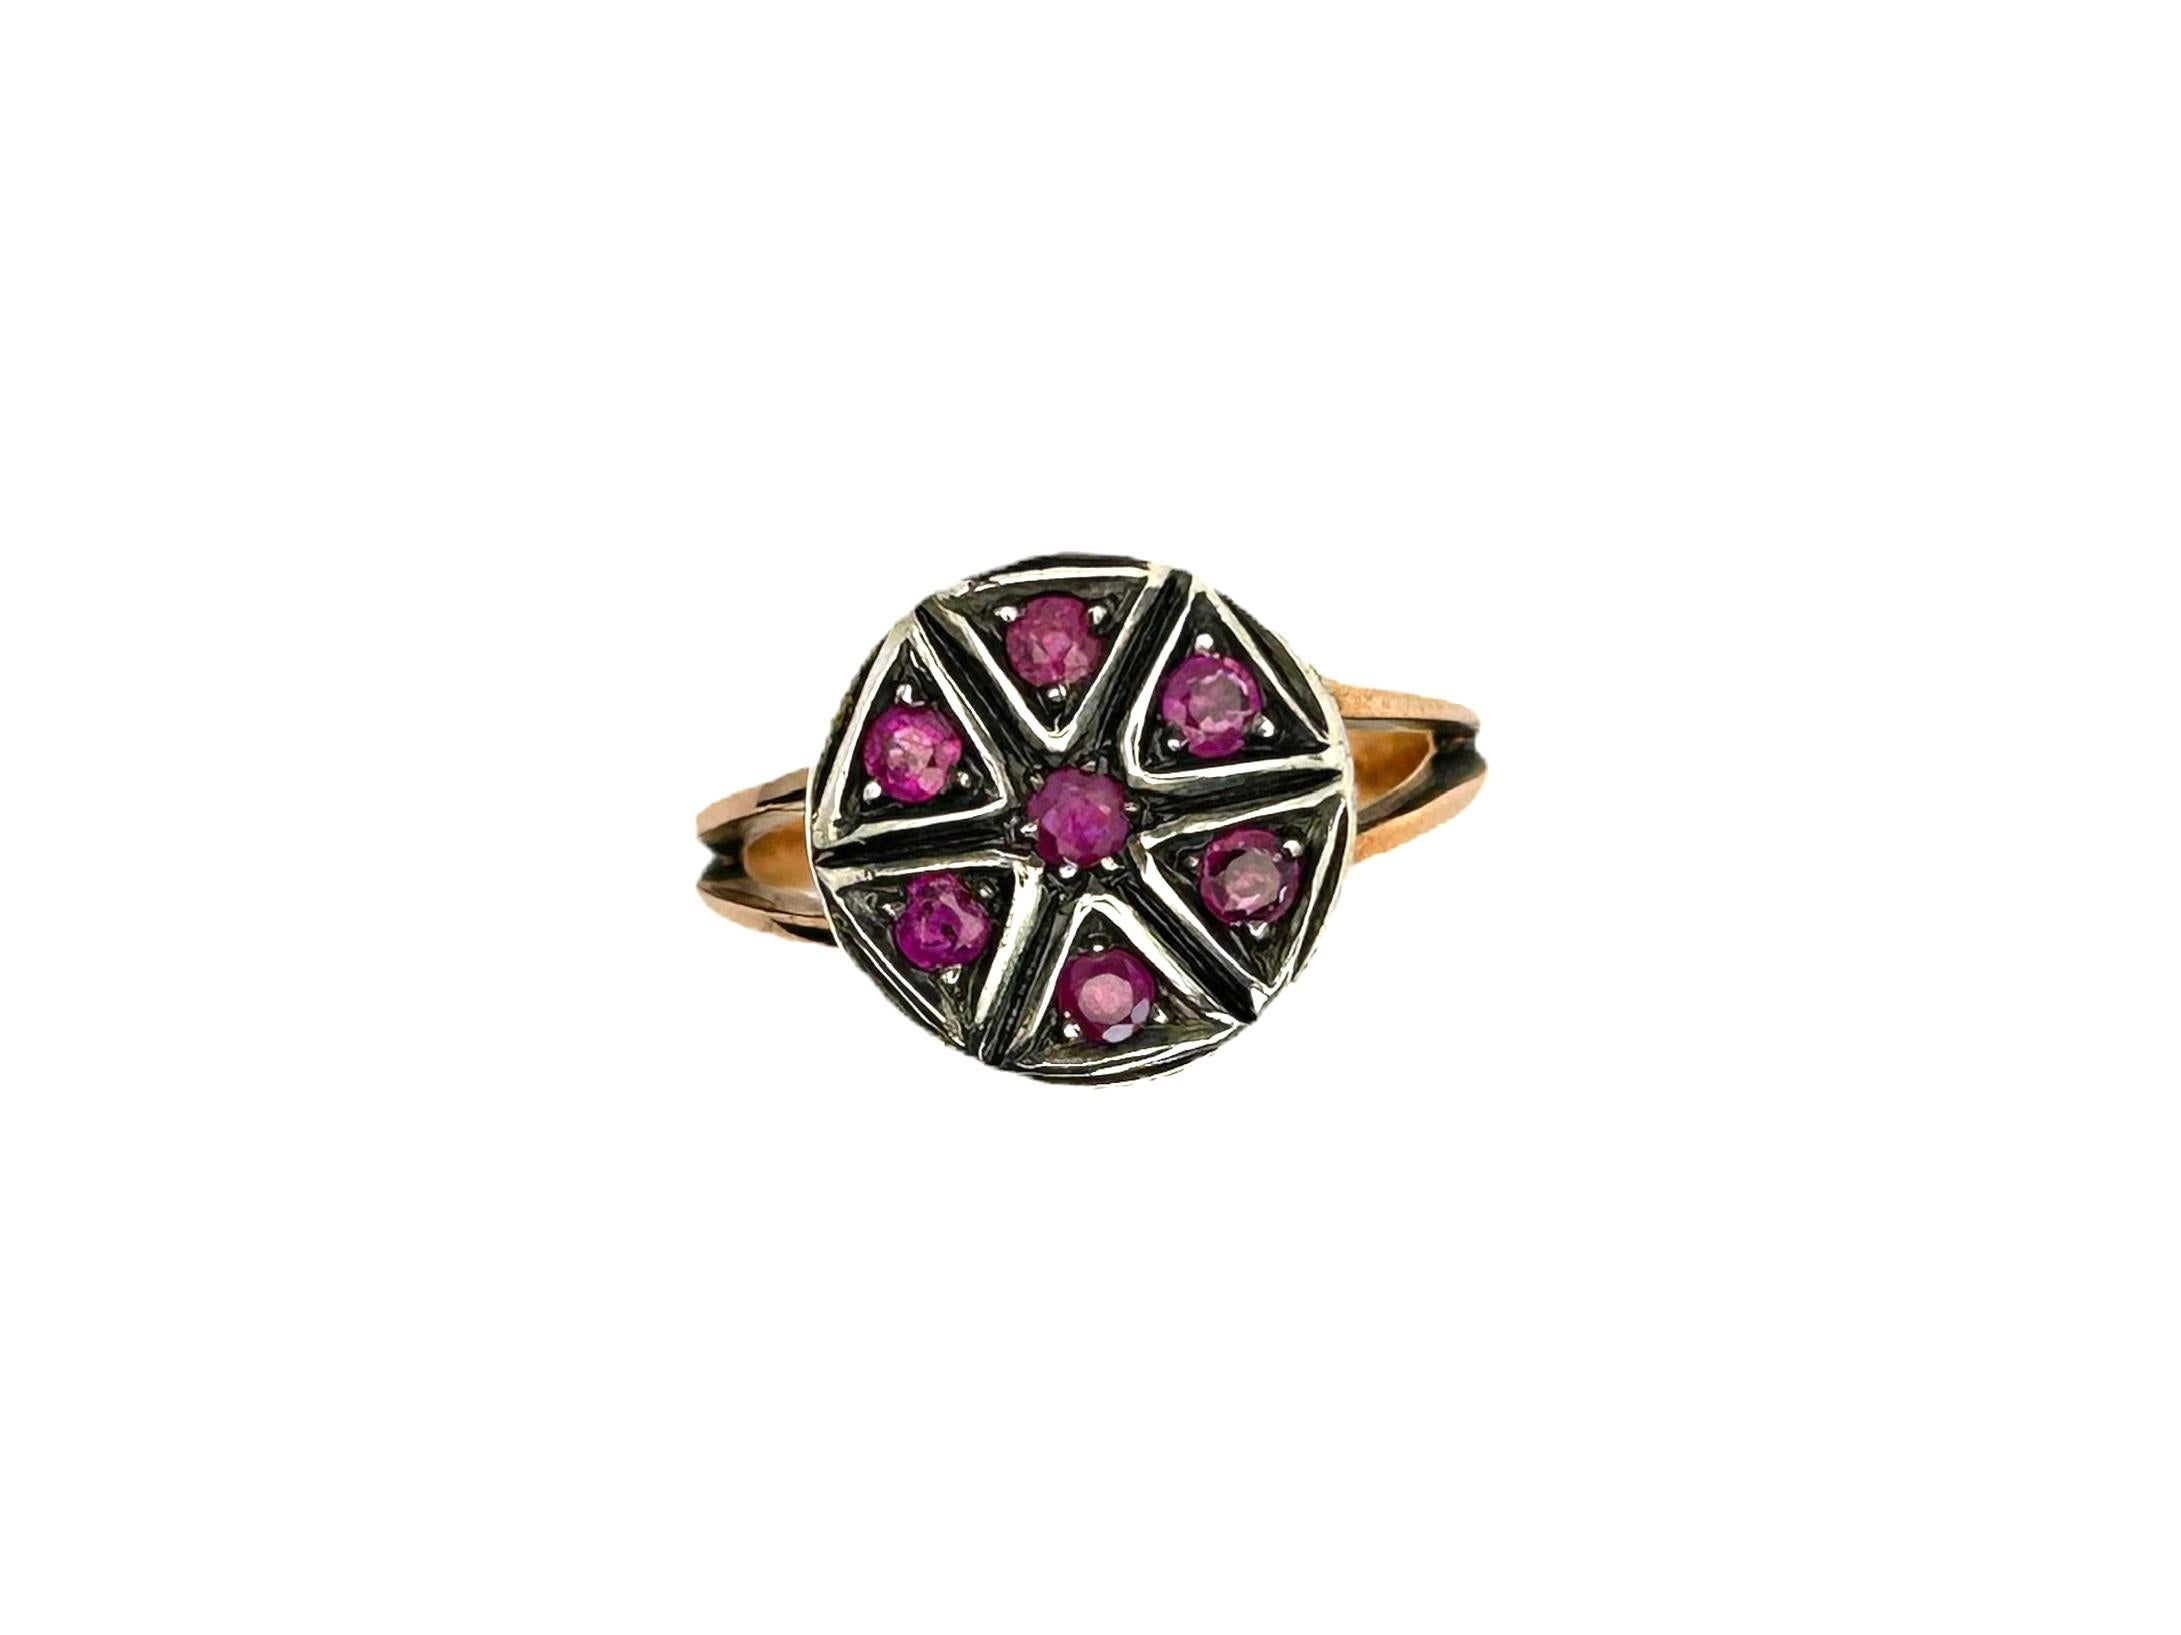 This Victorian era inspired ring is made in 9Kt pink gold and surrounded by a sterling silver round frame diameter 13mm.
It features 7 brilliant cut Rubies which gave a star pattern design at the center.

The combination of colors gives to this cool